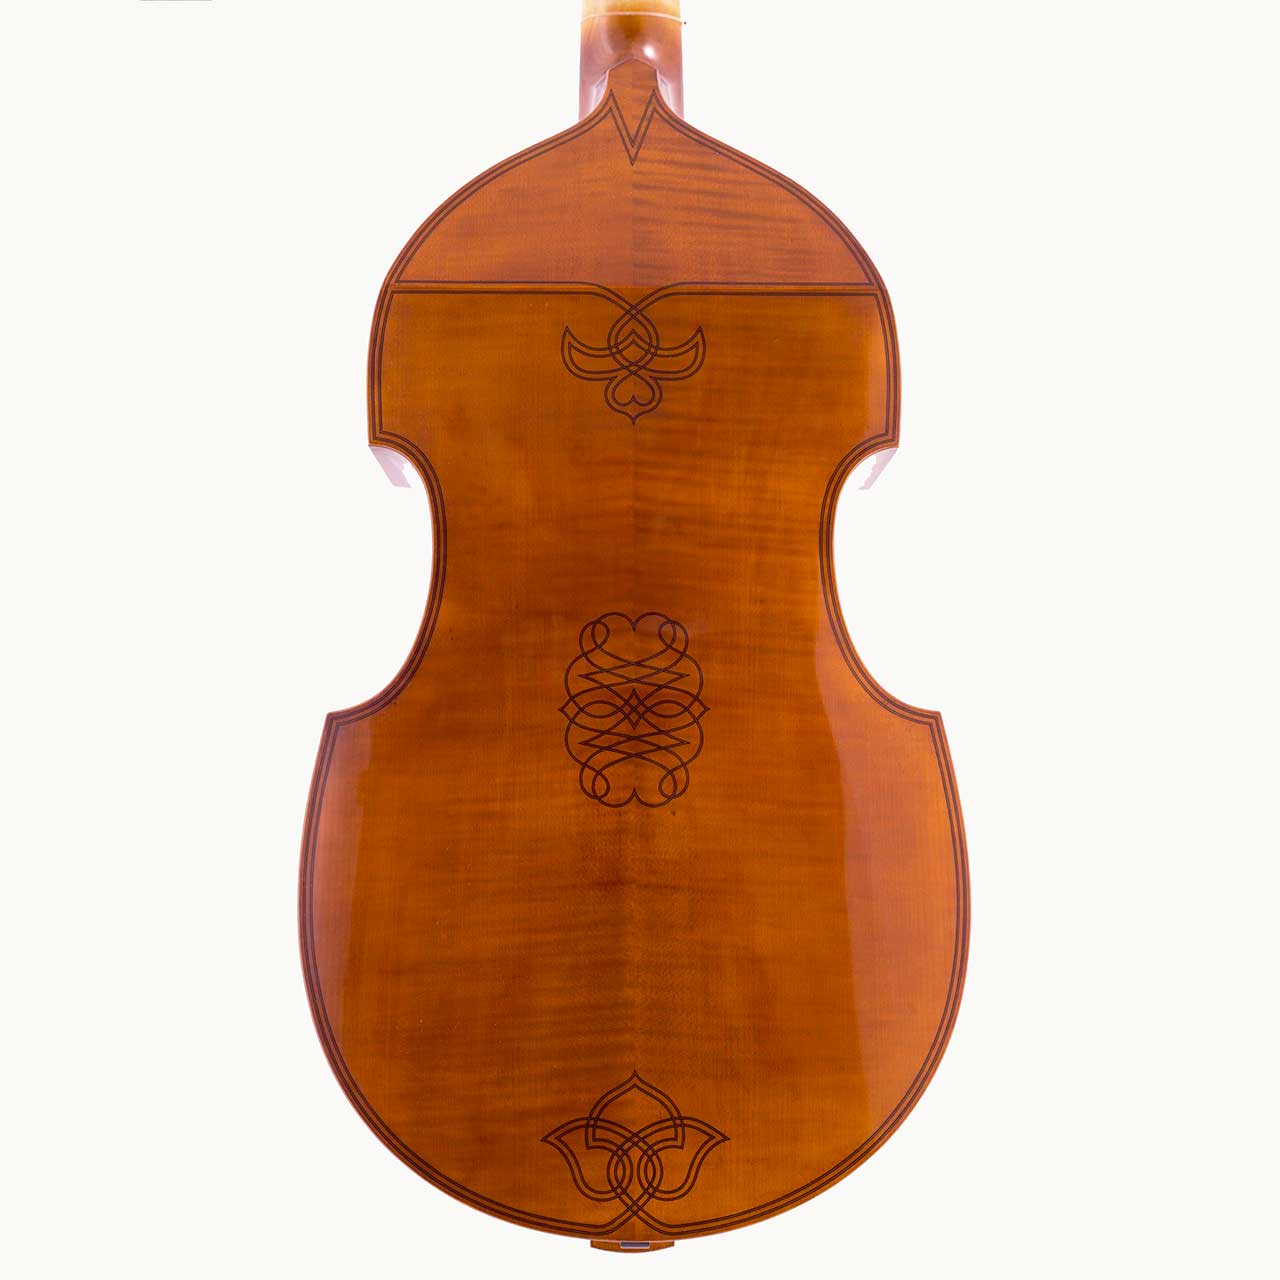 Viola da Gamba: History, Characteristics and Influence - Luthiers.com - Photos of Merion David Attwood's work